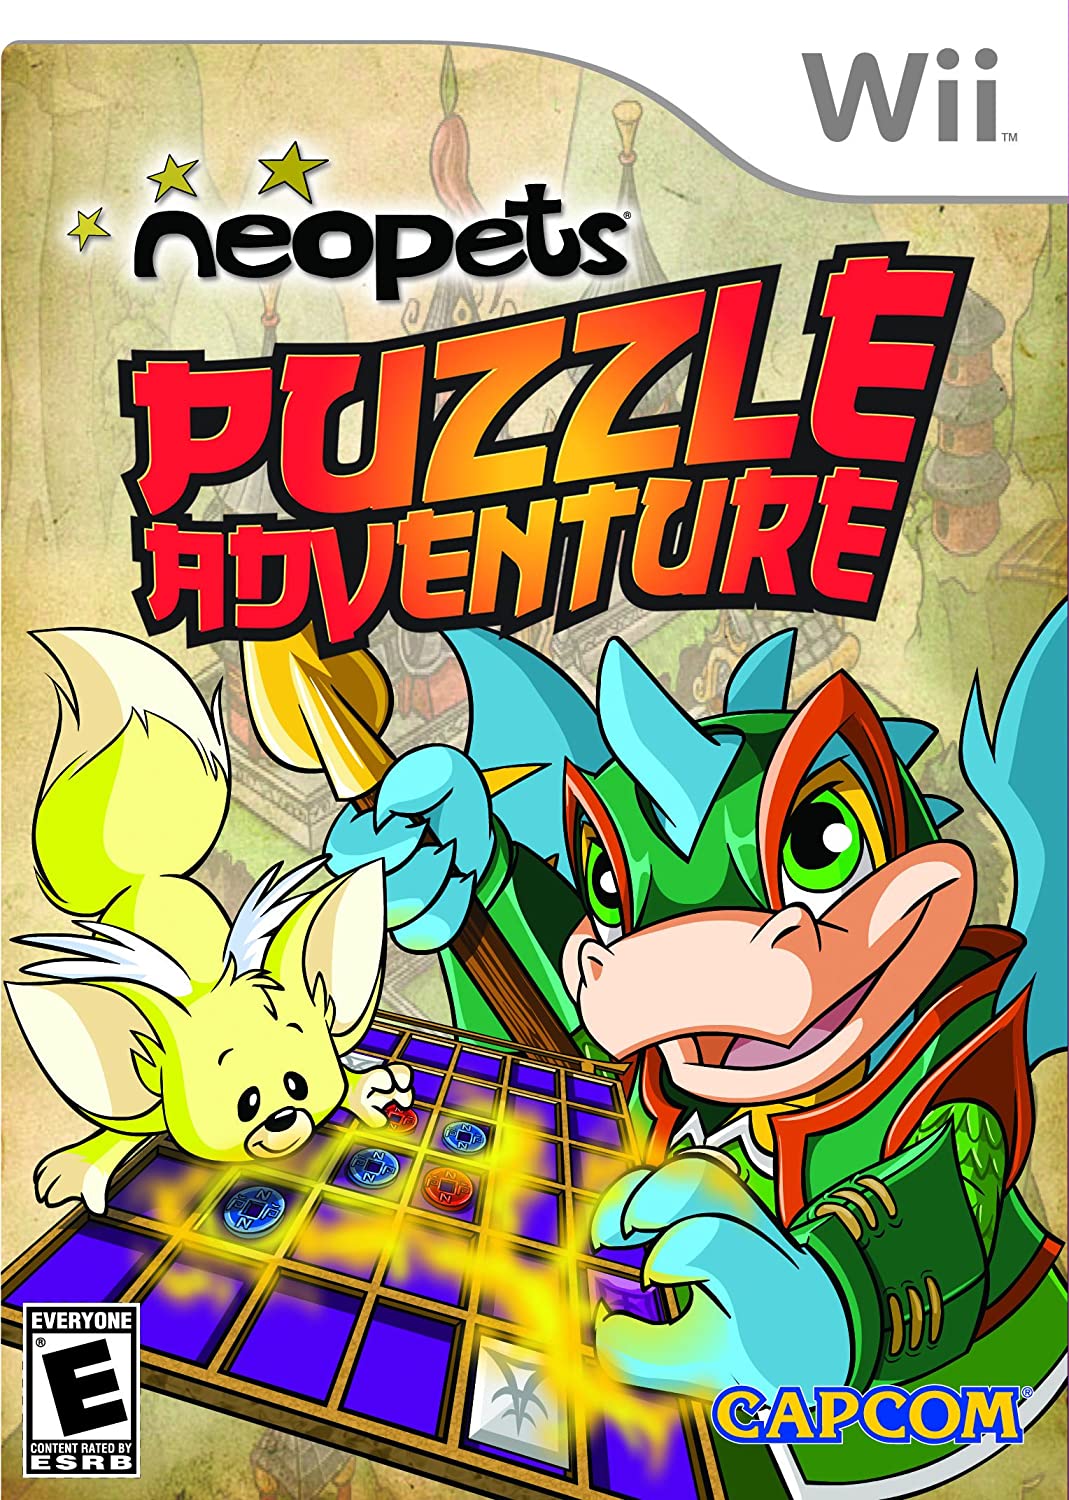 Neopets Puzzle Adventure player count stats